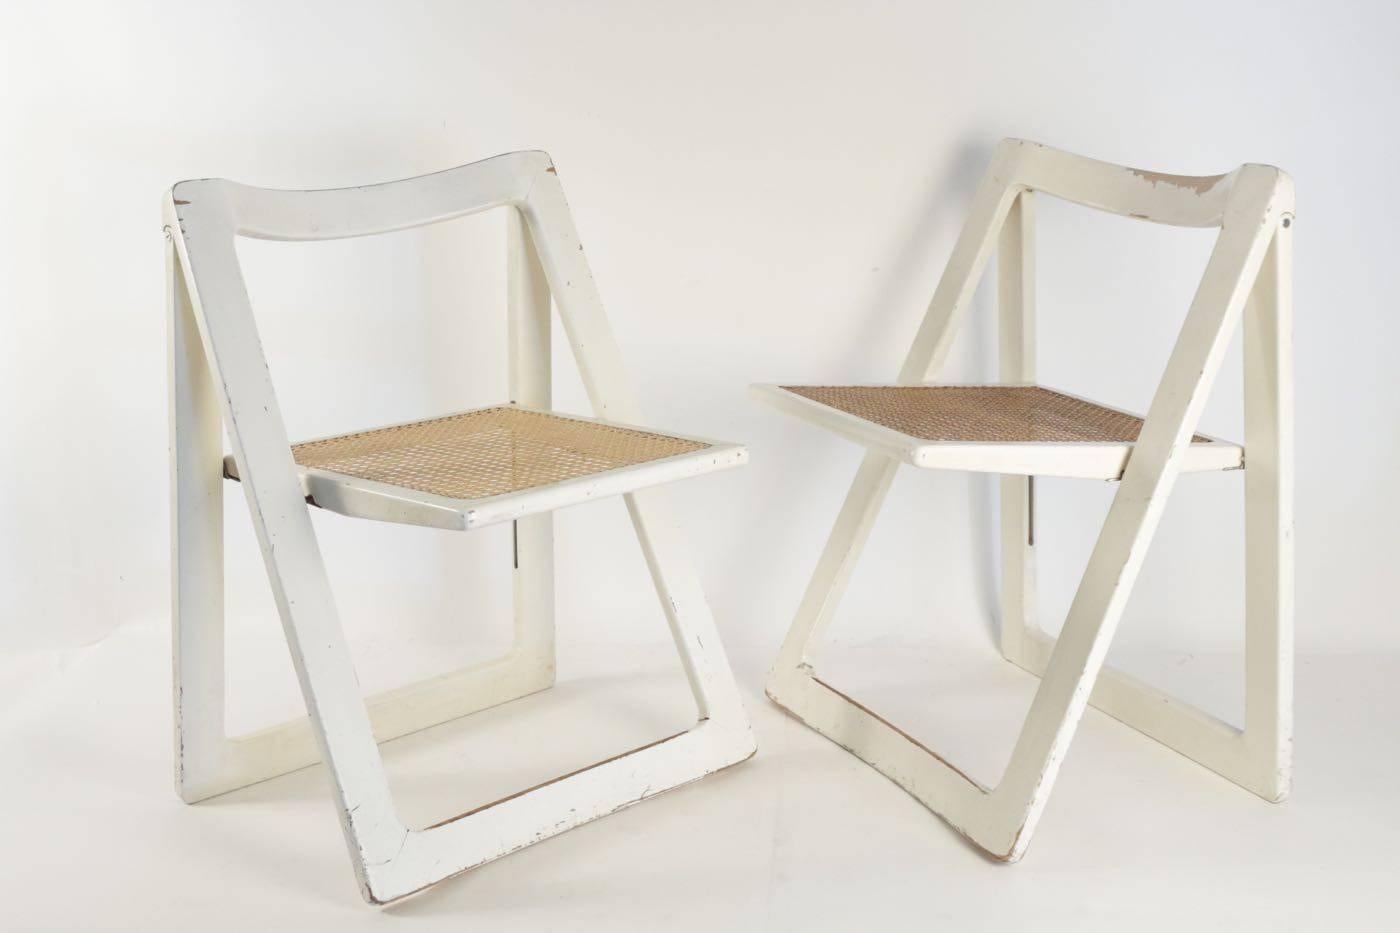 Three mid century modern folding chairs, circa 1960, With cane and white lacquer
